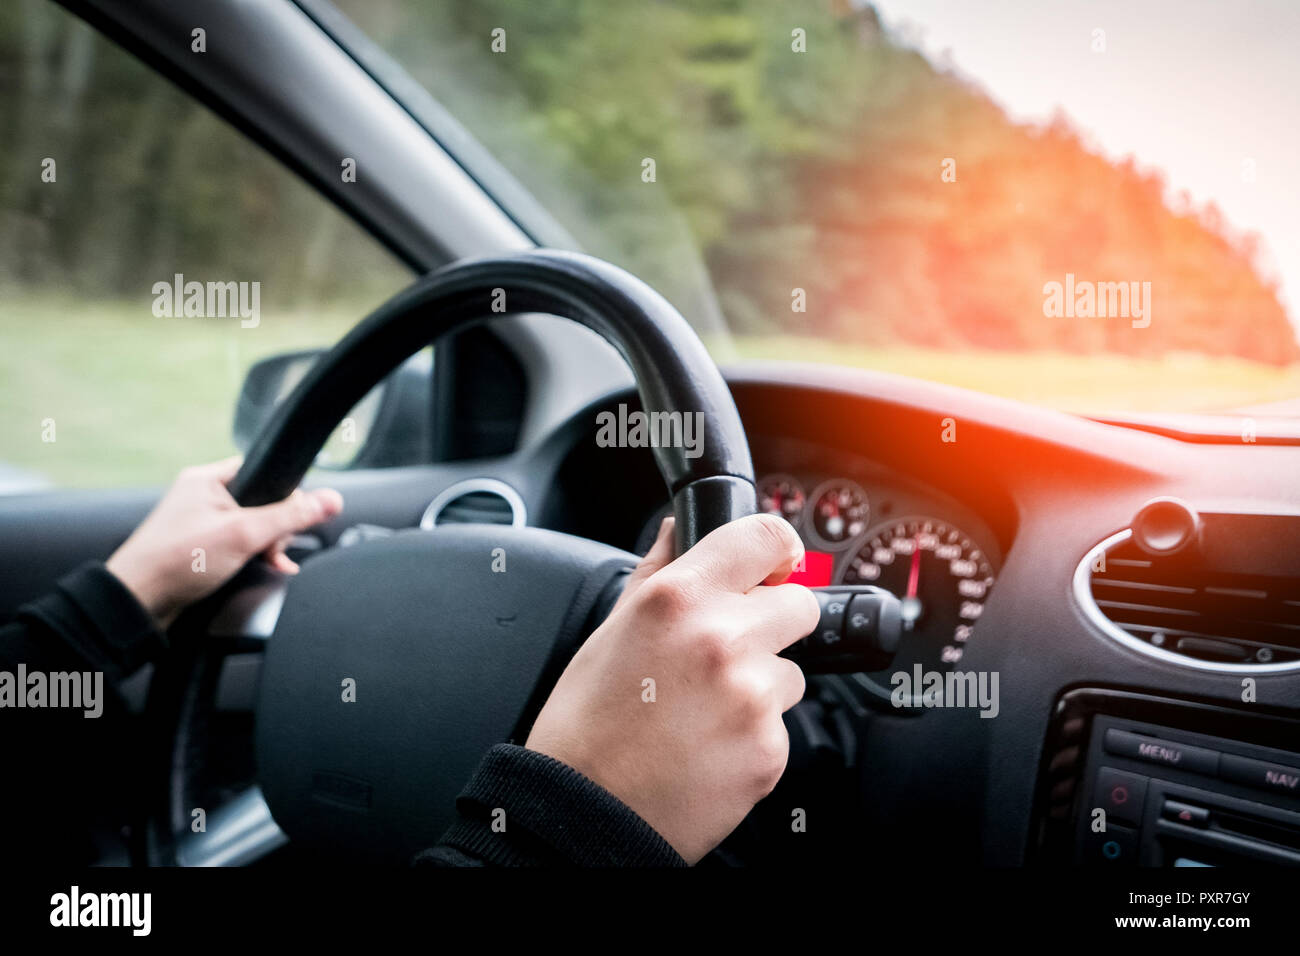 Page 5 - Pov Driving High Resolution Stock Photography and Images - Alamy